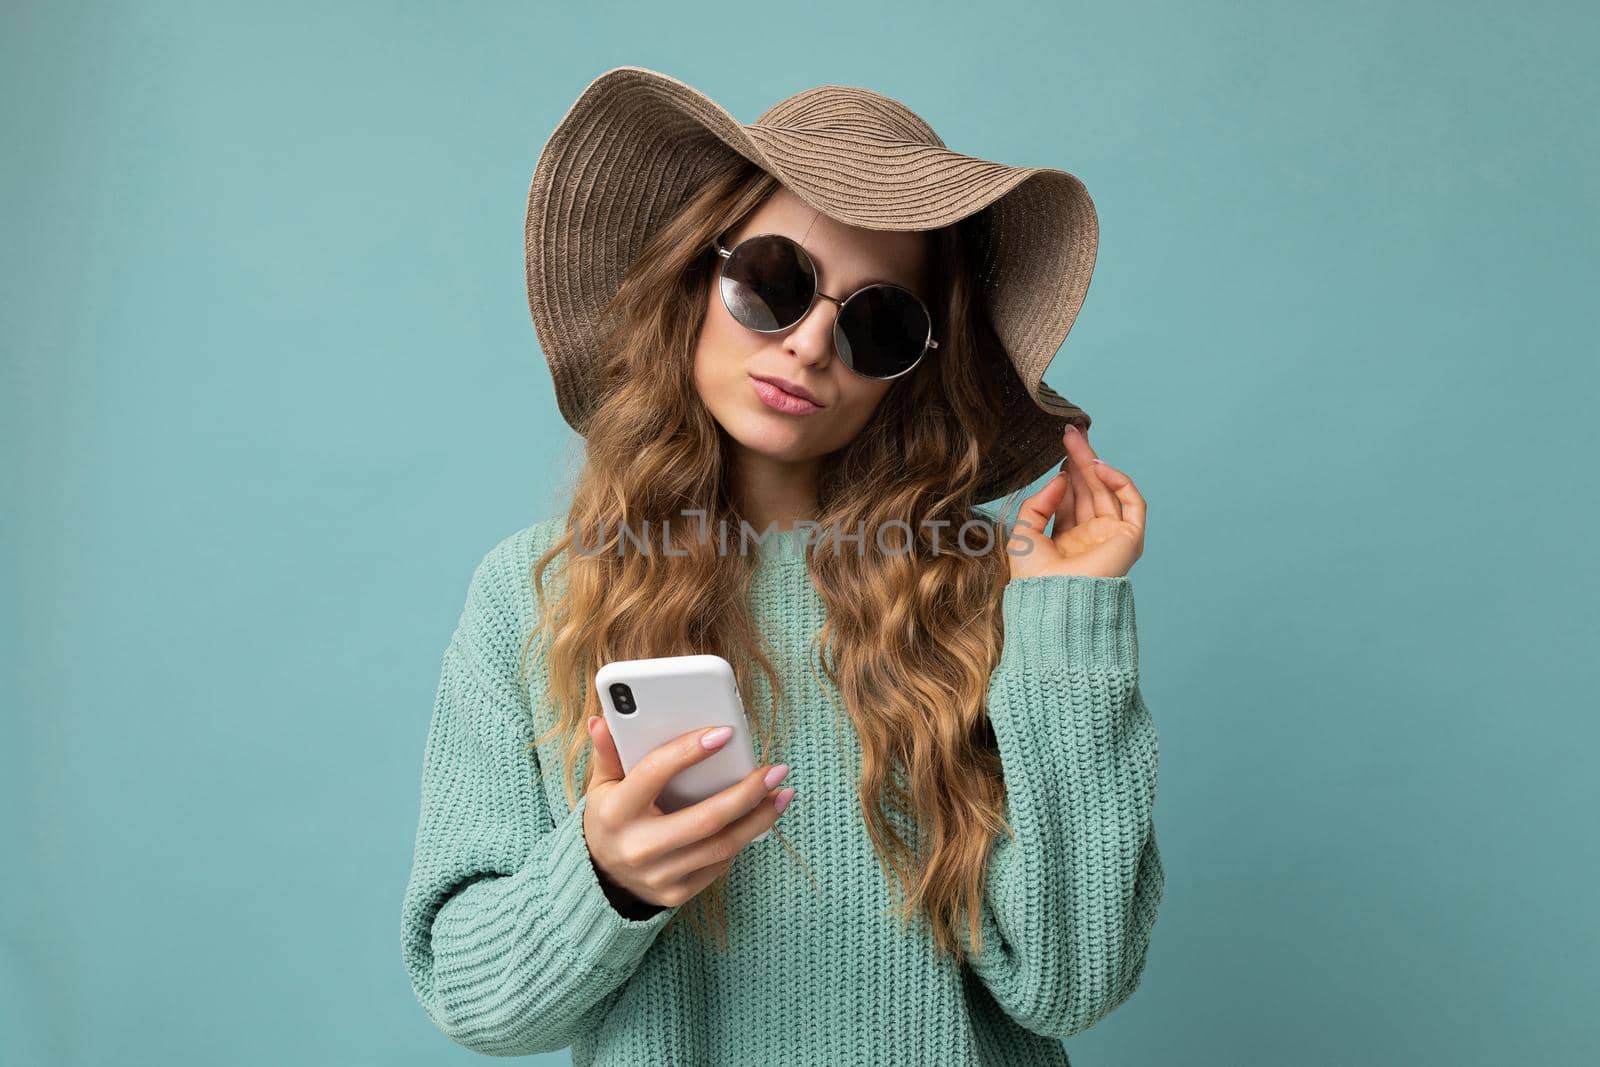 Attractive young blonde woman wearing blue sweater hat and sunglasses standing isolated over blue background surfing on the internet via phone looking at gadjet by TRMK